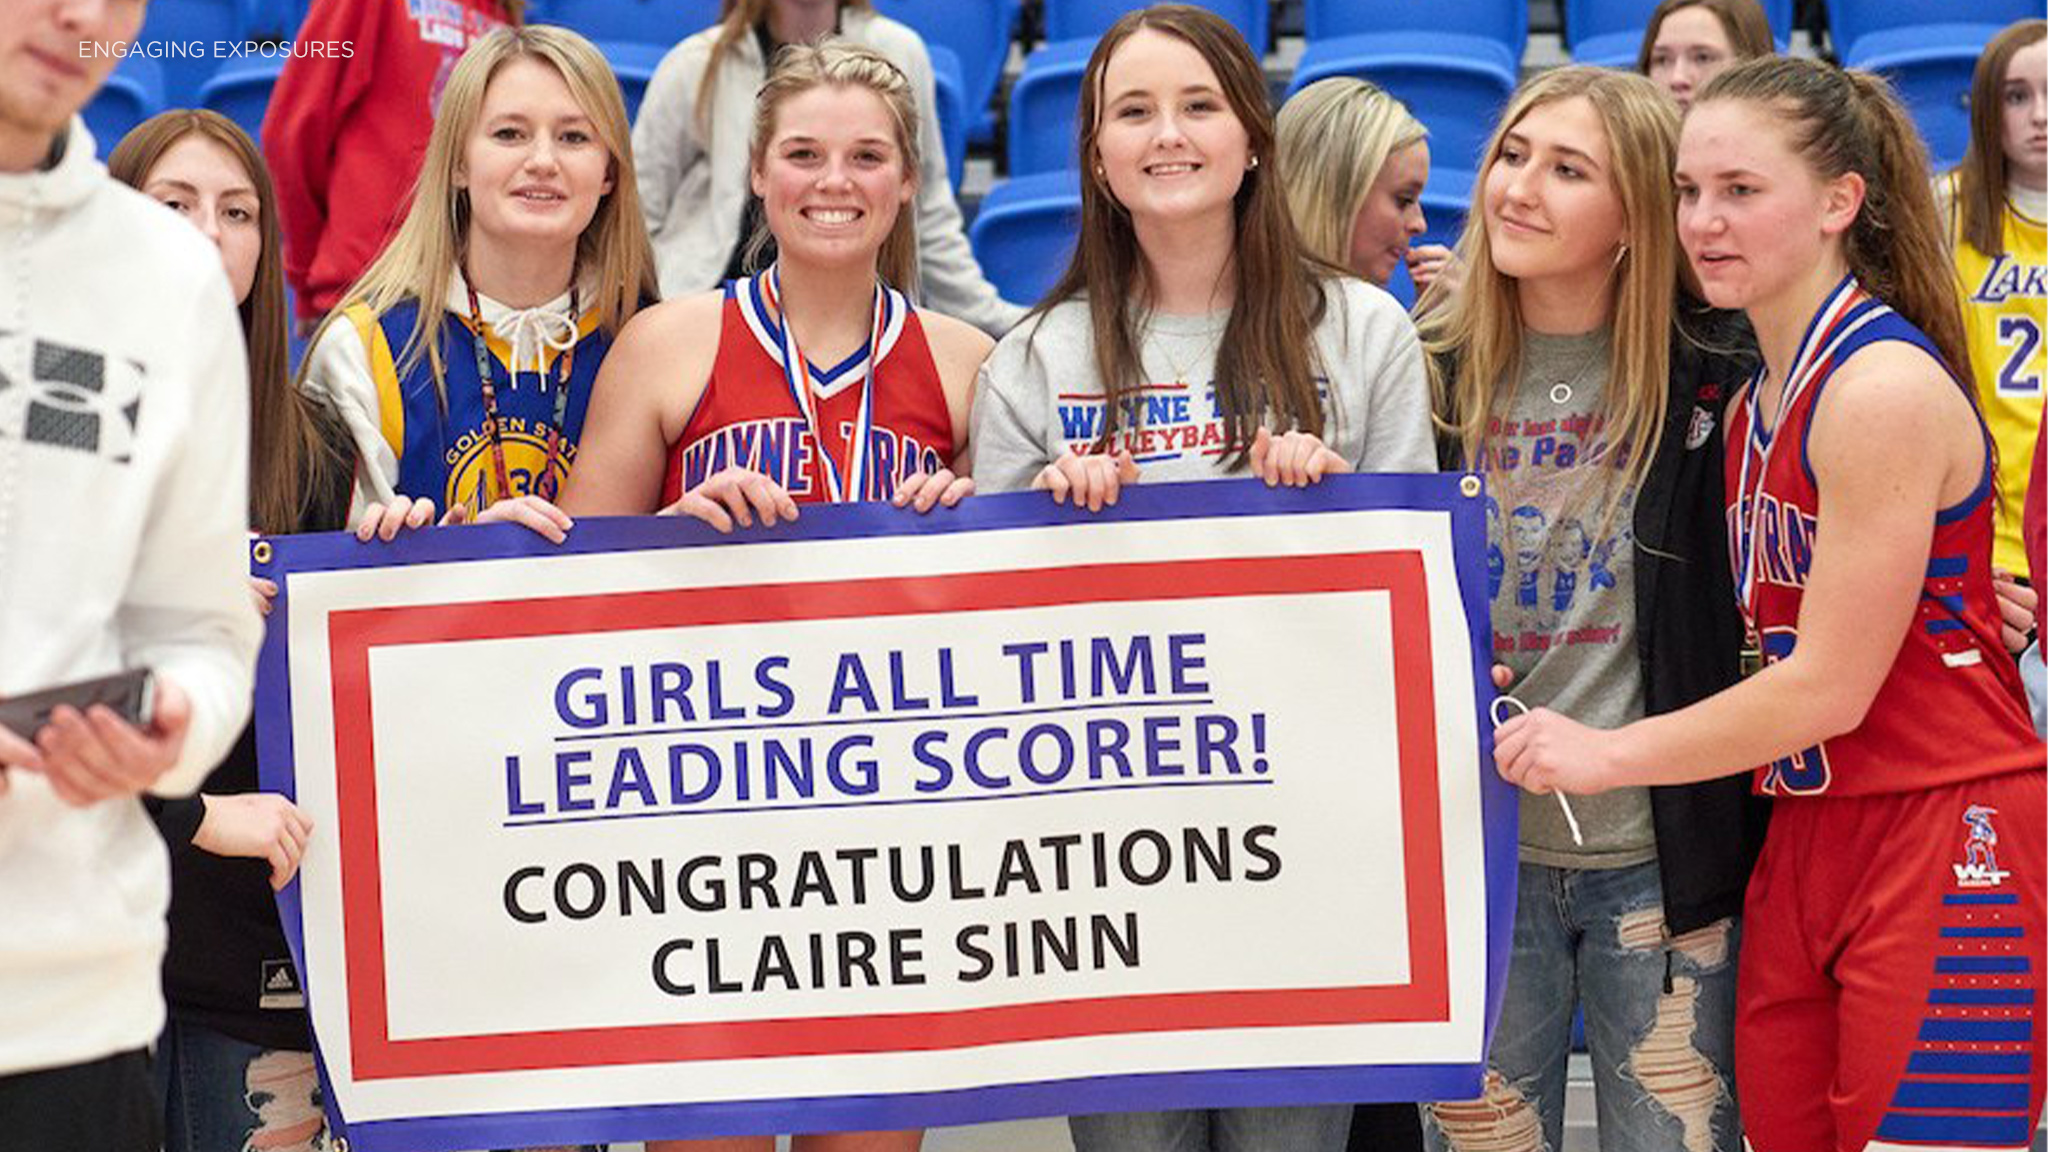 Sinn's scoring record underscores years of success for Wayne Trace